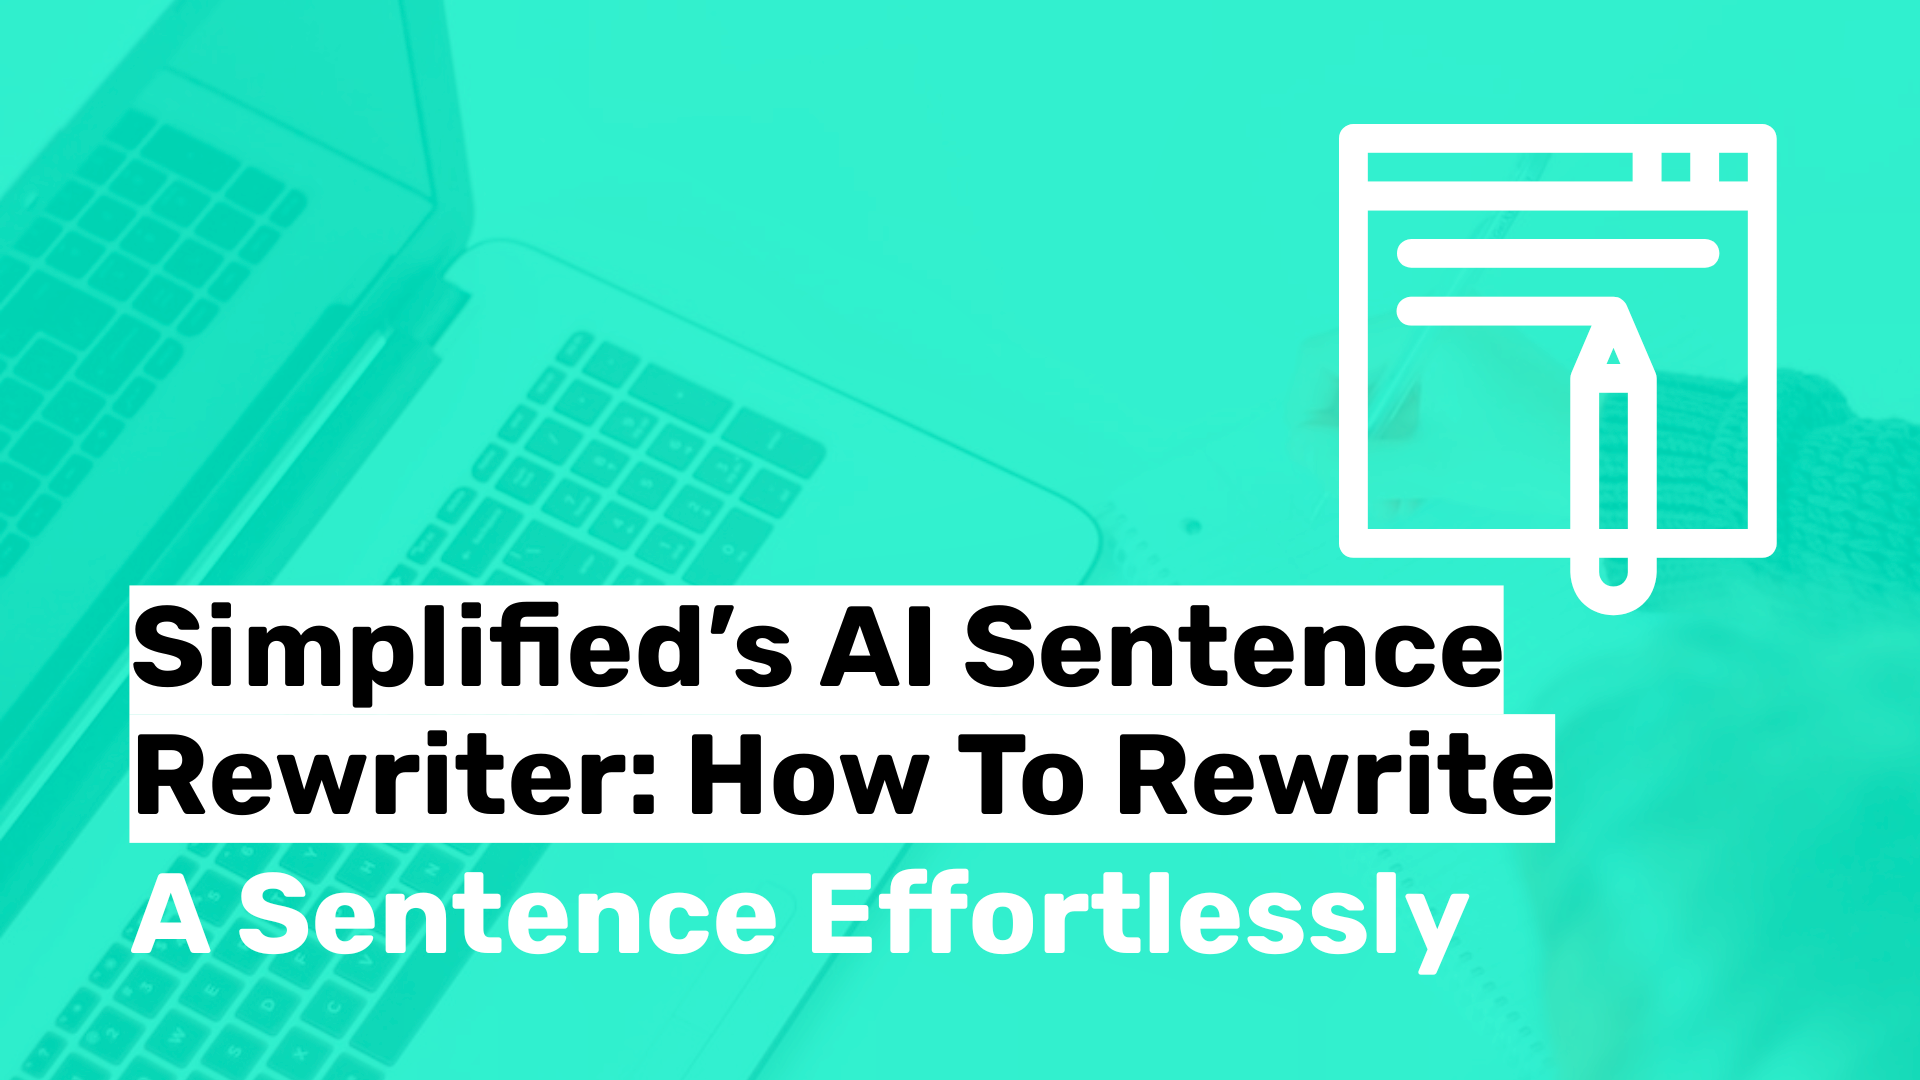 Simplified’s AI Sentence Rewriter: How To Rewrite A Sentence Effortlessly